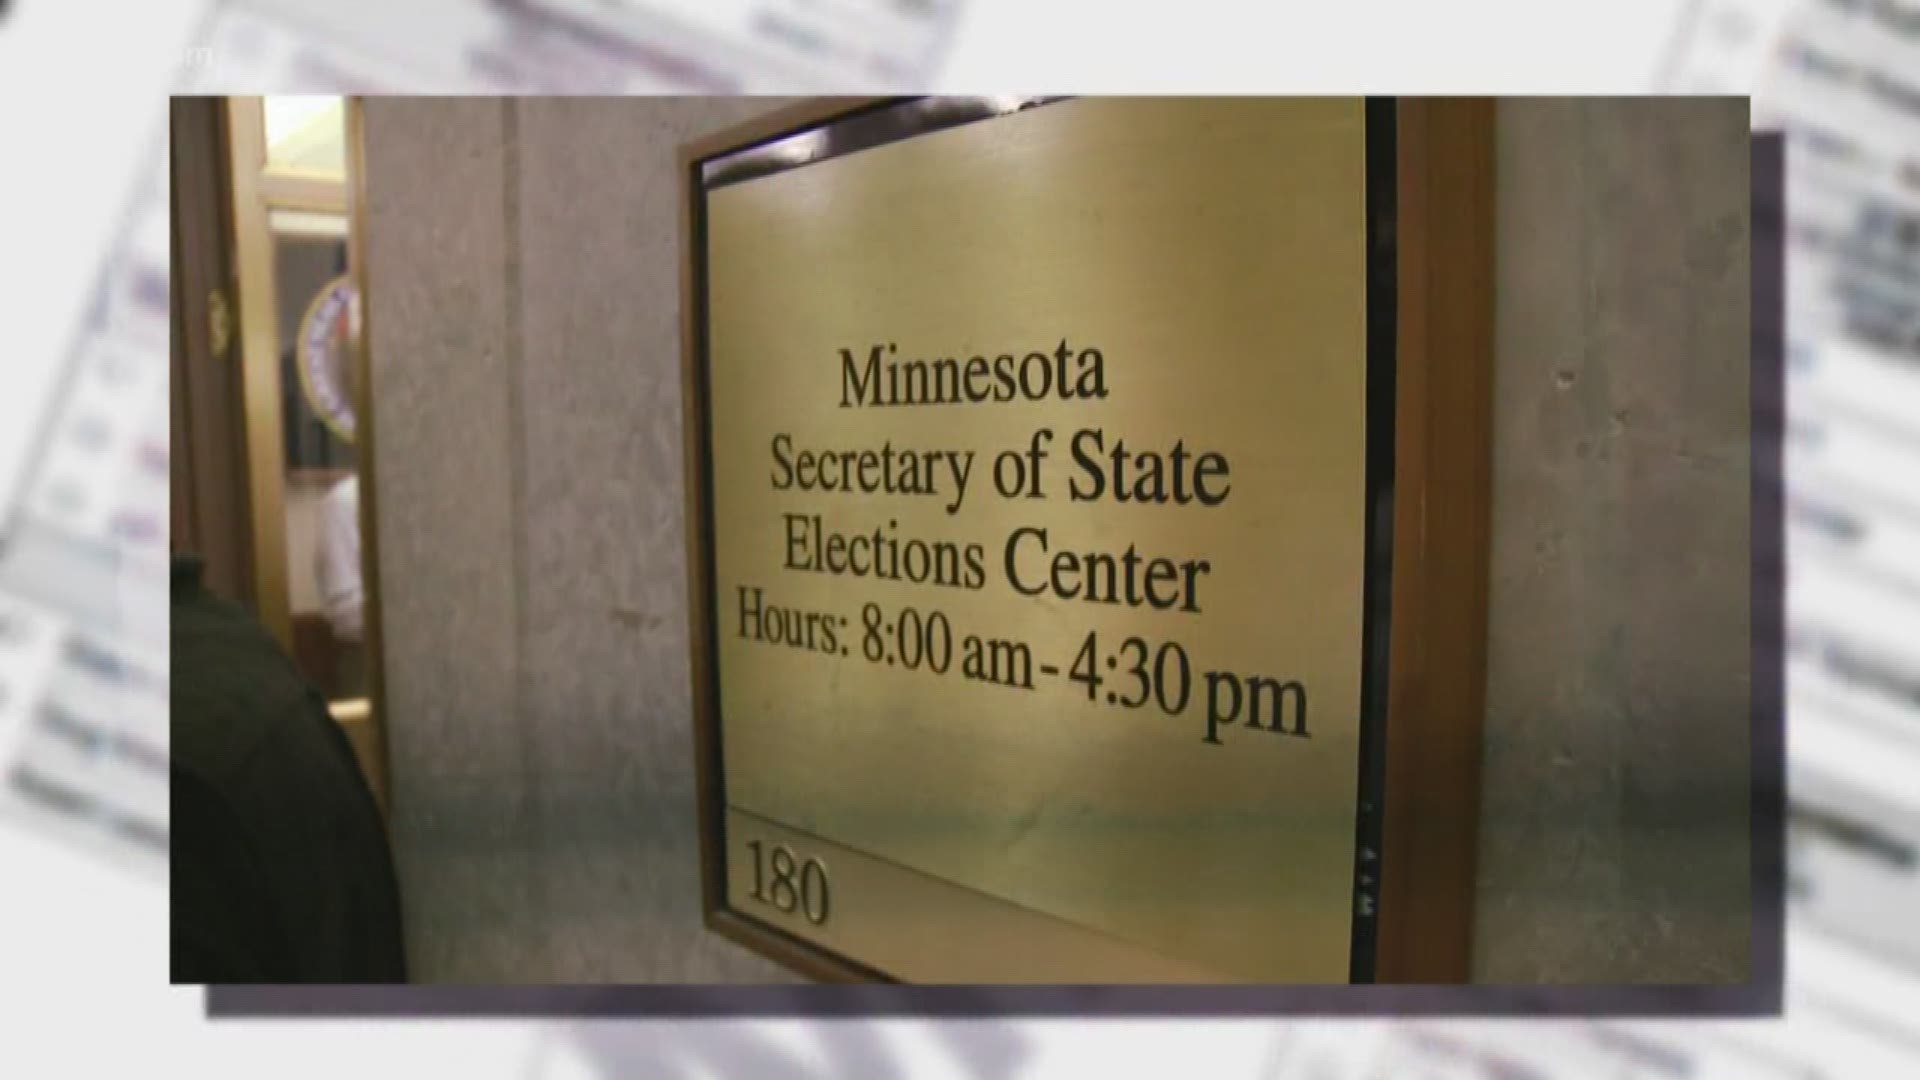 In Minnesota's 5th Congressional District, five candidates are battling to replace Congressman Keith Ellison in one of the most reliably Democratic districts in the nation. https://kare11.tv/2vrY6Pa